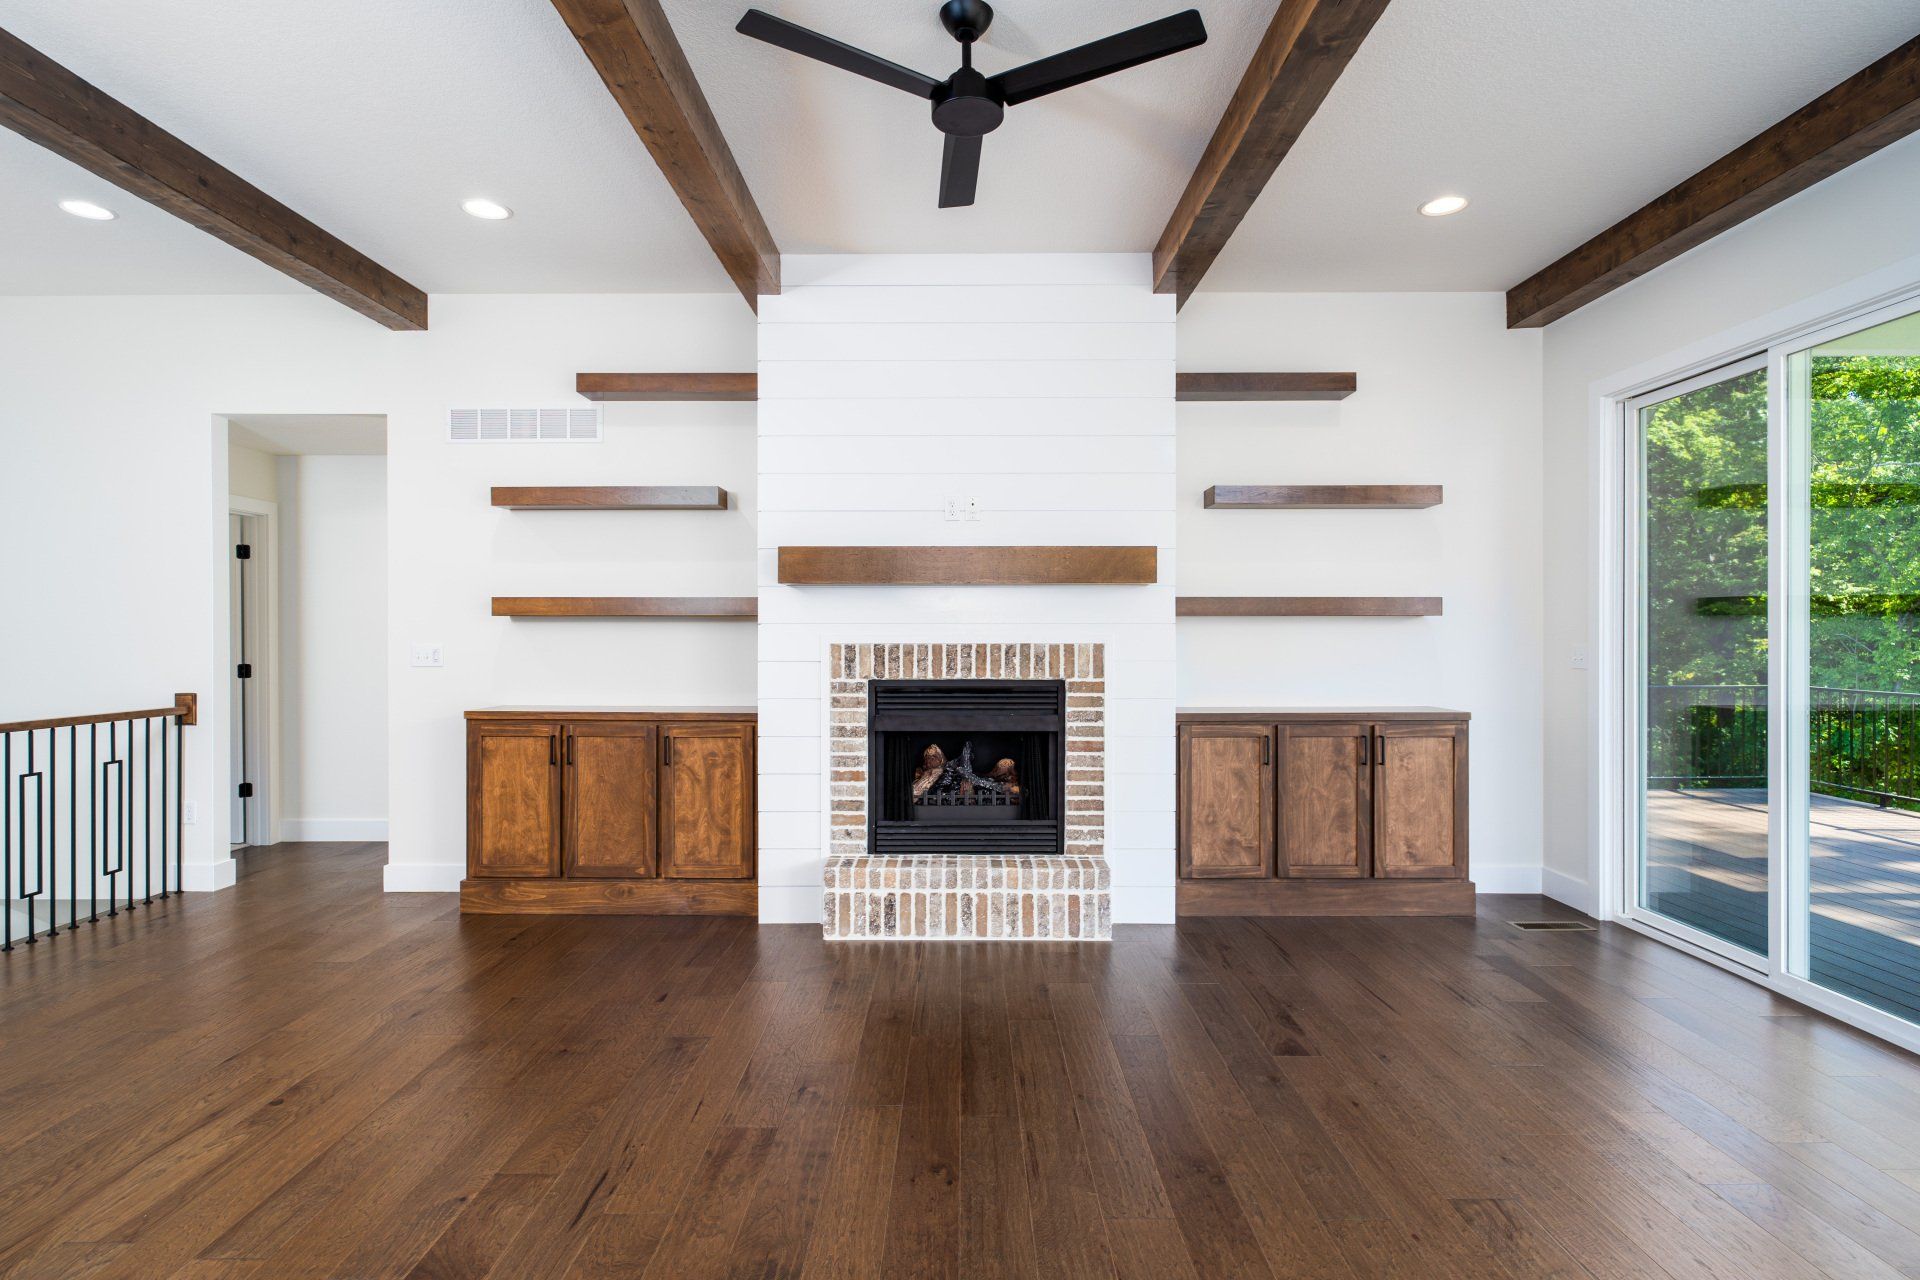 Build a Beautiful Fireplace With Custom Shelving With Help From Hansman Custom Homes in Columbia, MO